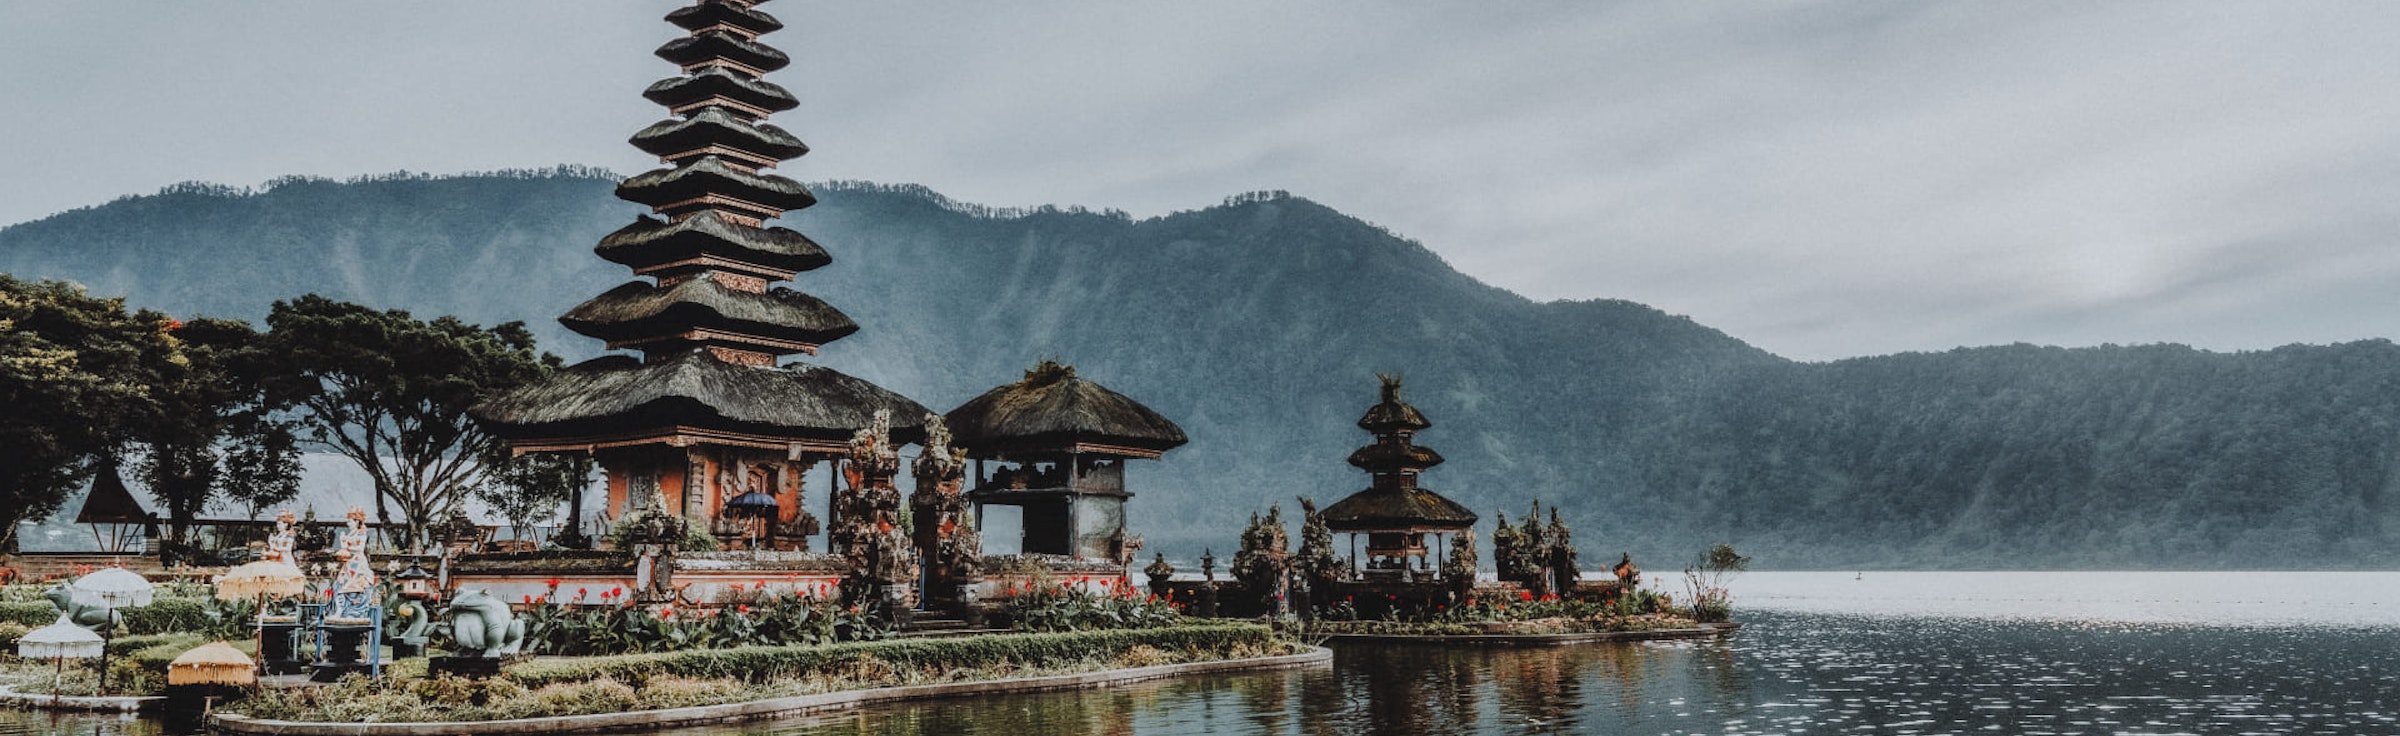 Bali Holiday Packages Including Flights